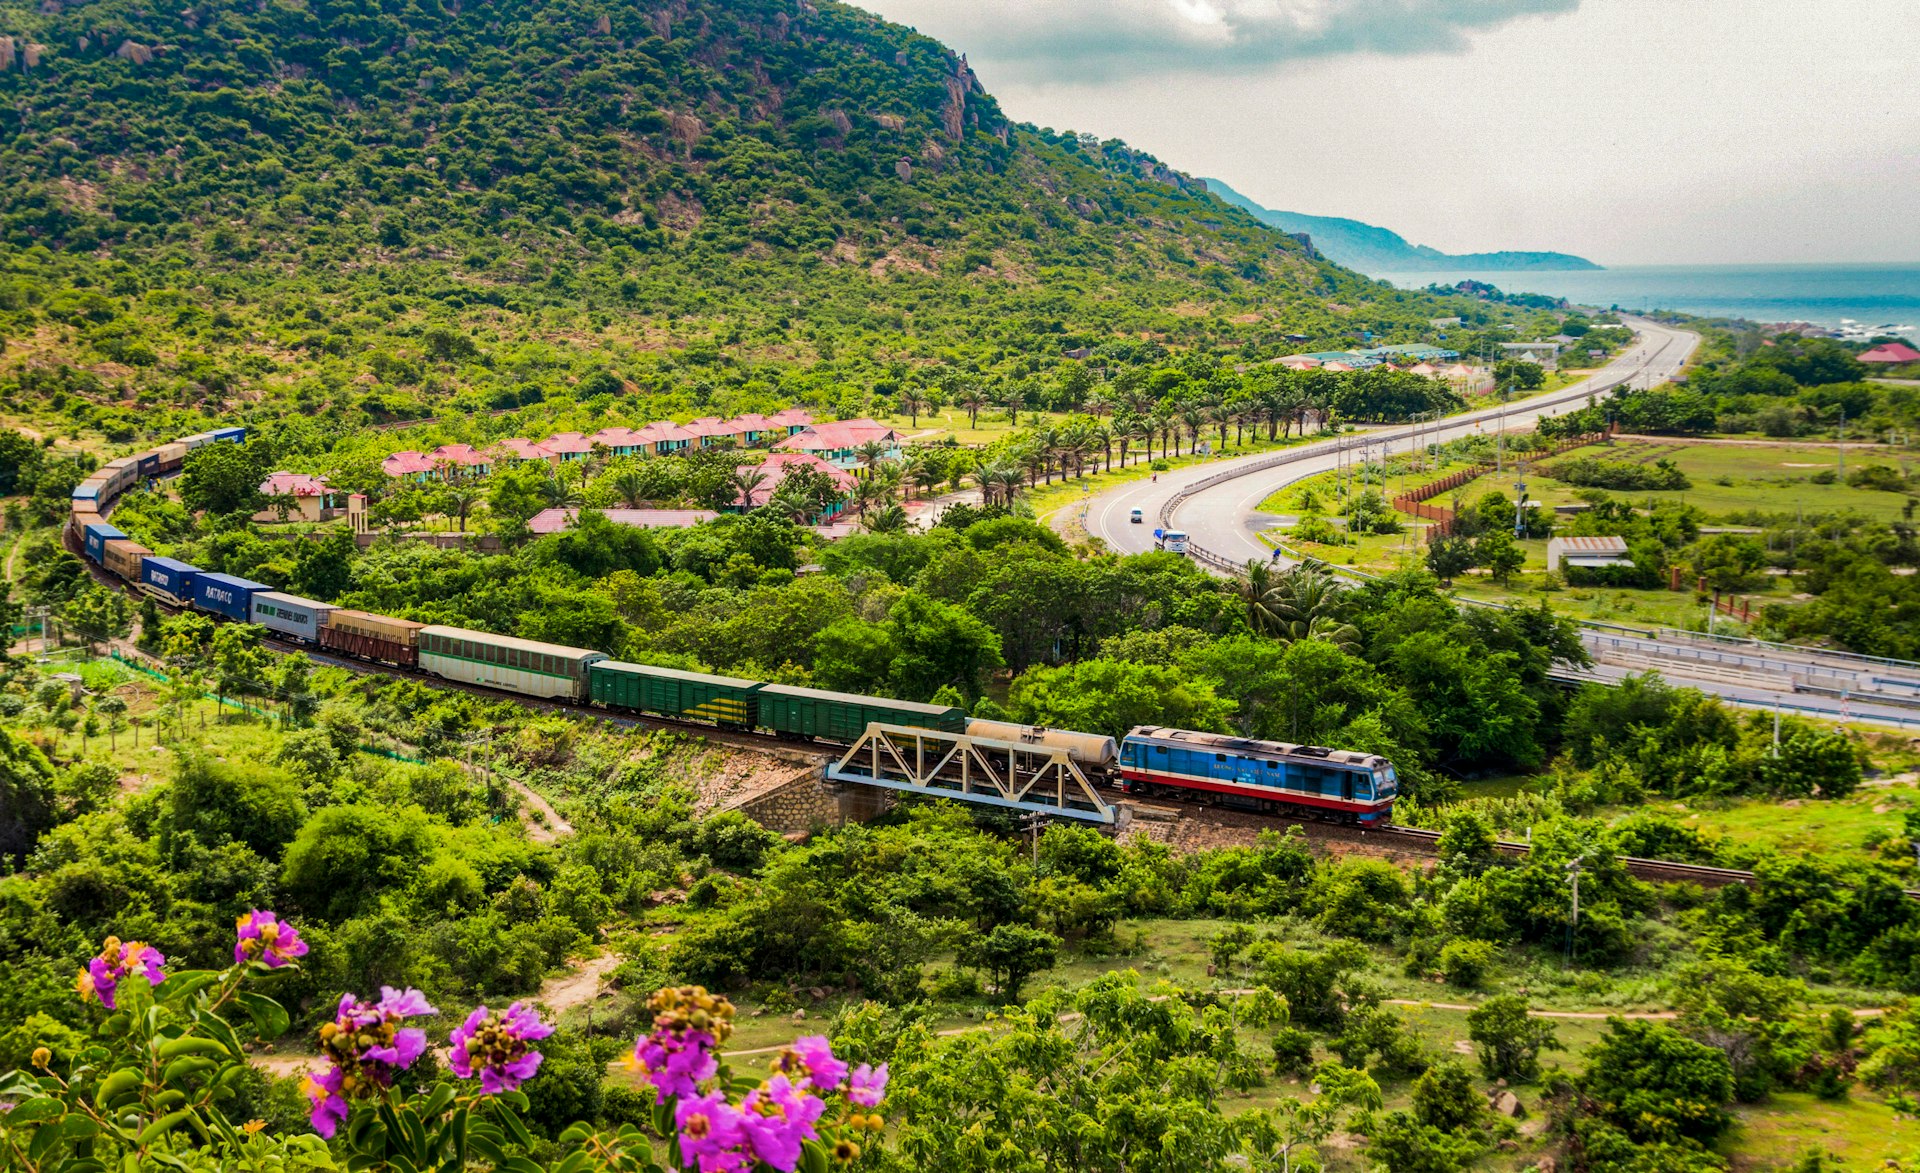 A train travels through a lush environment with trees alongside the coastline. 